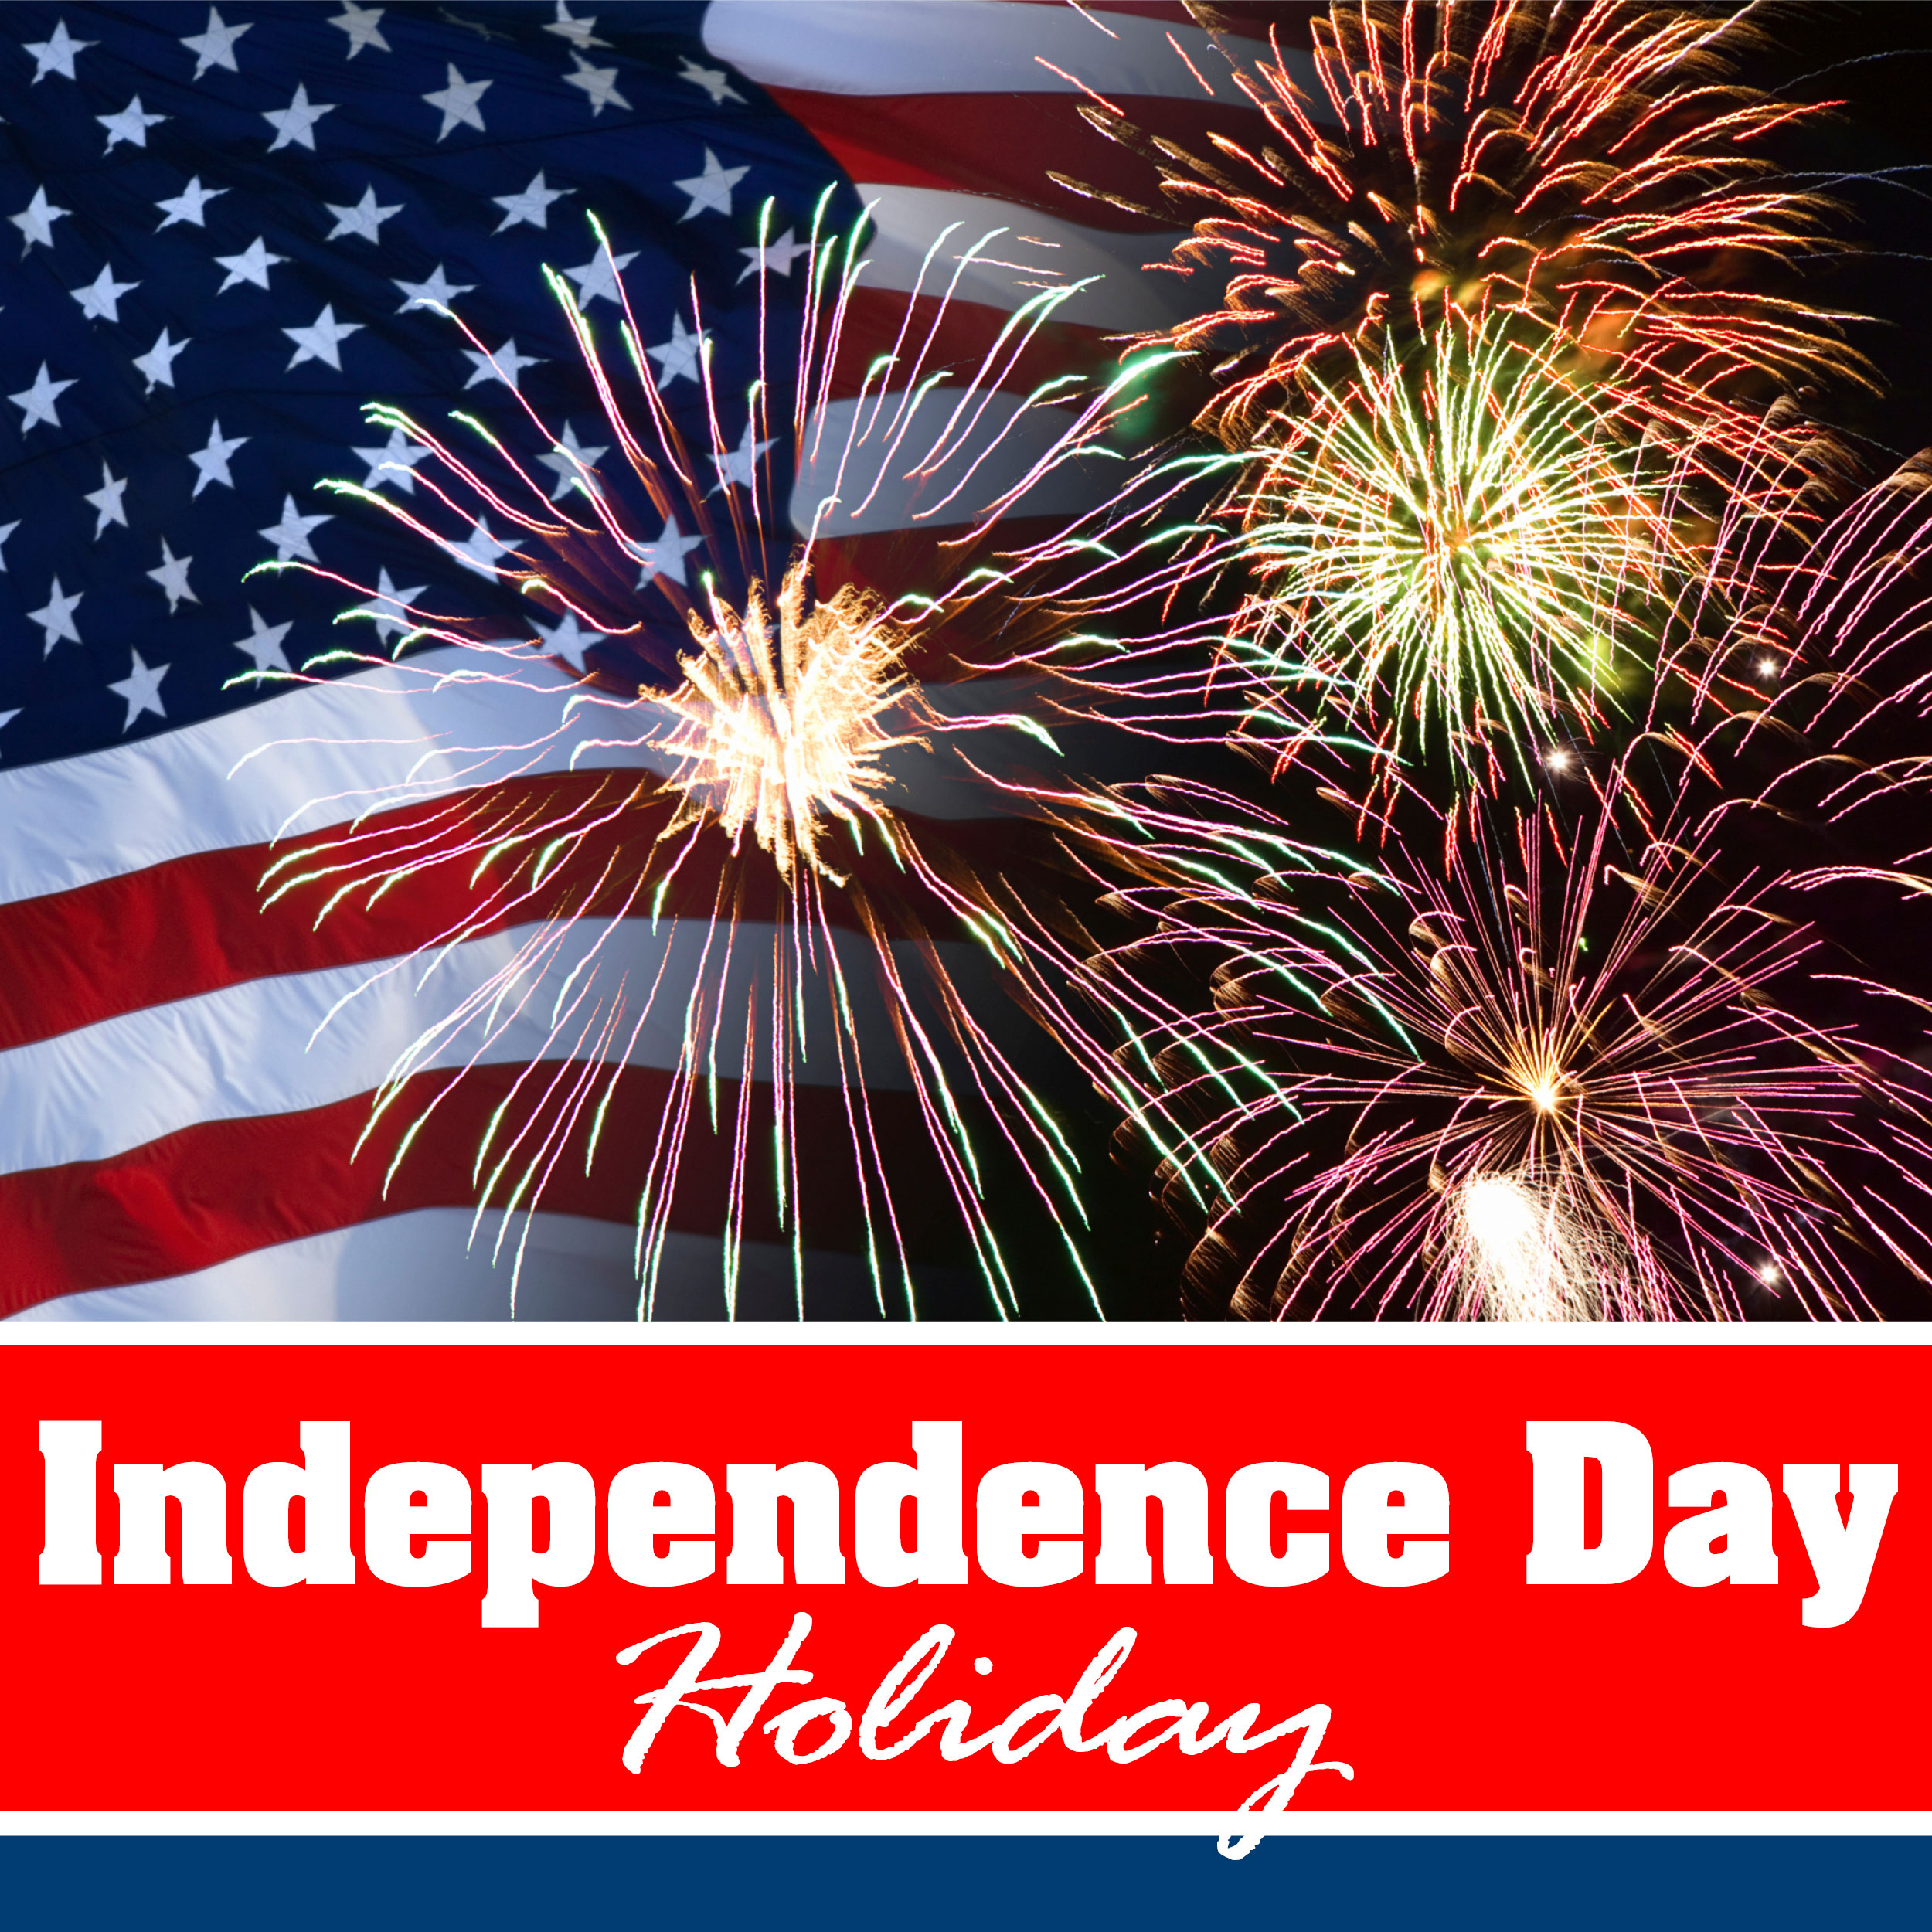 Independence Day Holiday